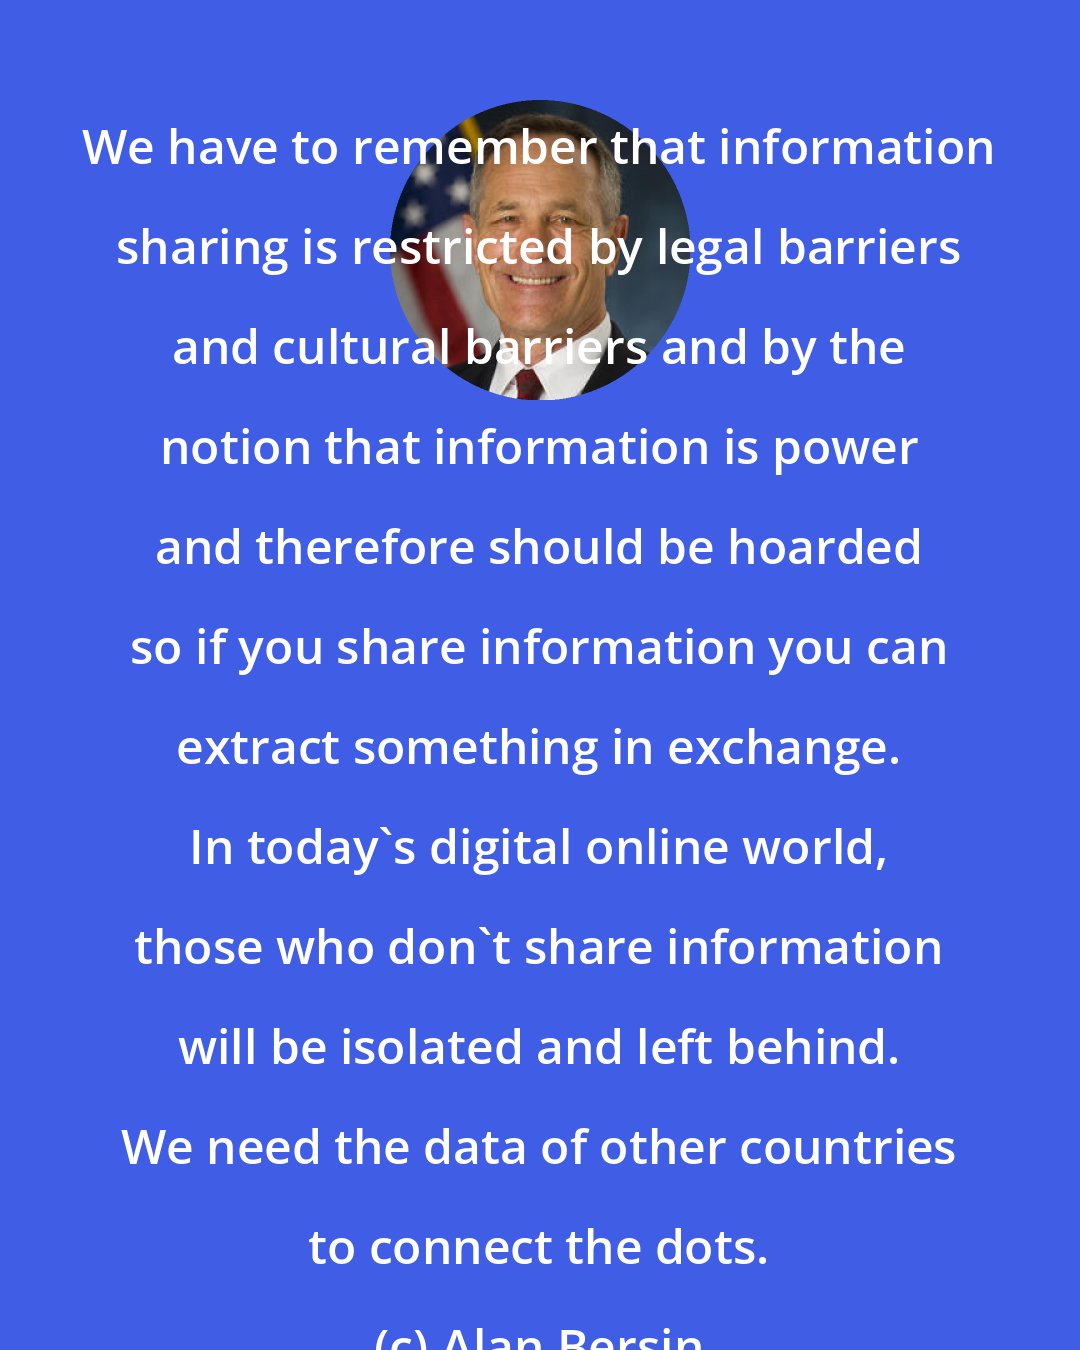 Alan Bersin: We have to remember that information sharing is restricted by legal barriers and cultural barriers and by the notion that information is power and therefore should be hoarded so if you share information you can extract something in exchange. In today's digital online world, those who don't share information will be isolated and left behind. We need the data of other countries to connect the dots.